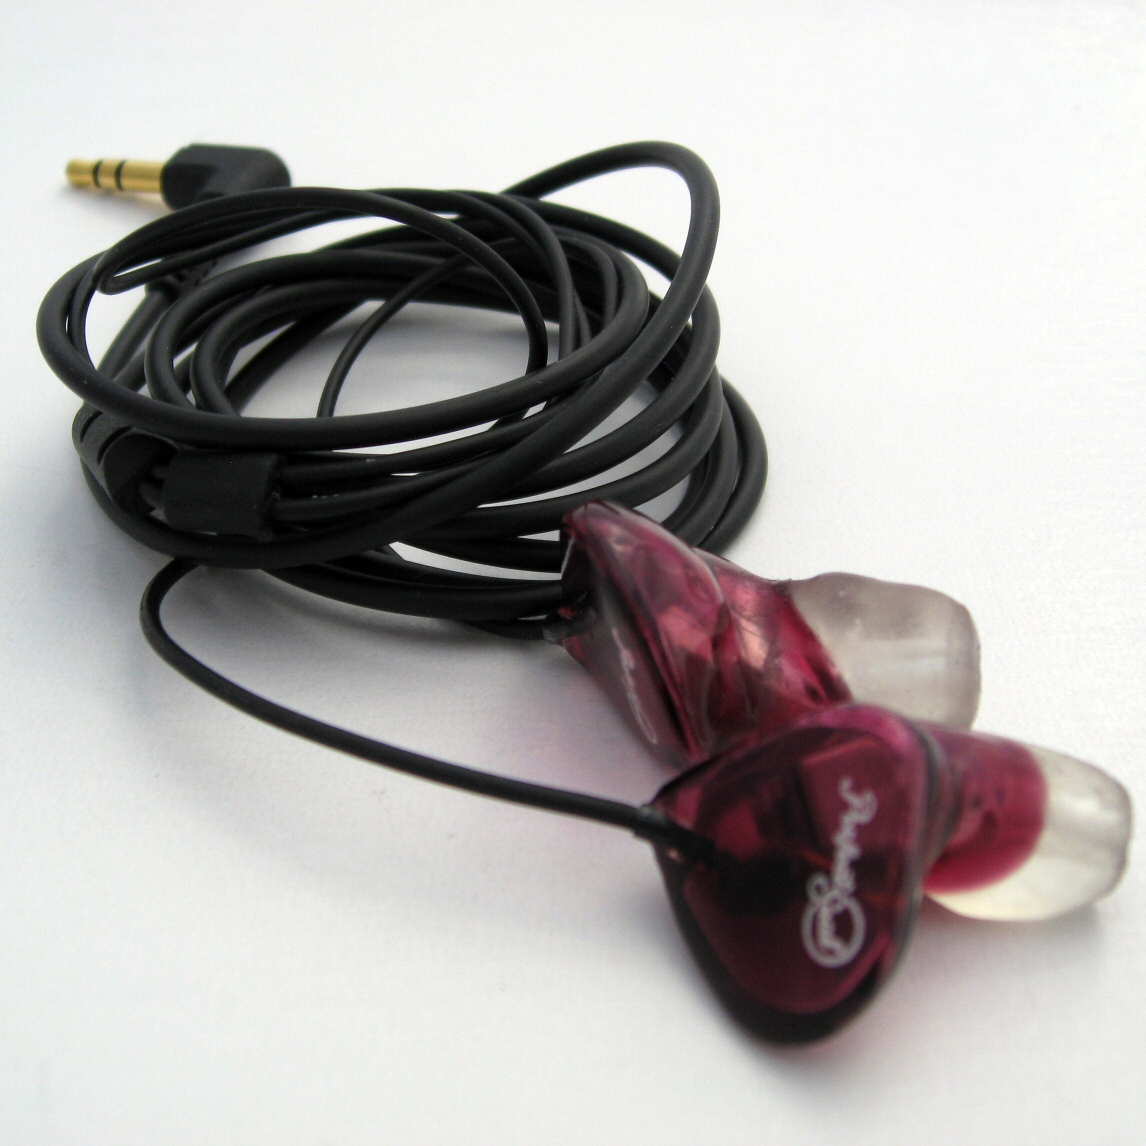 Perfect Seal Sportbud Silver canal only custom in-ear monitors